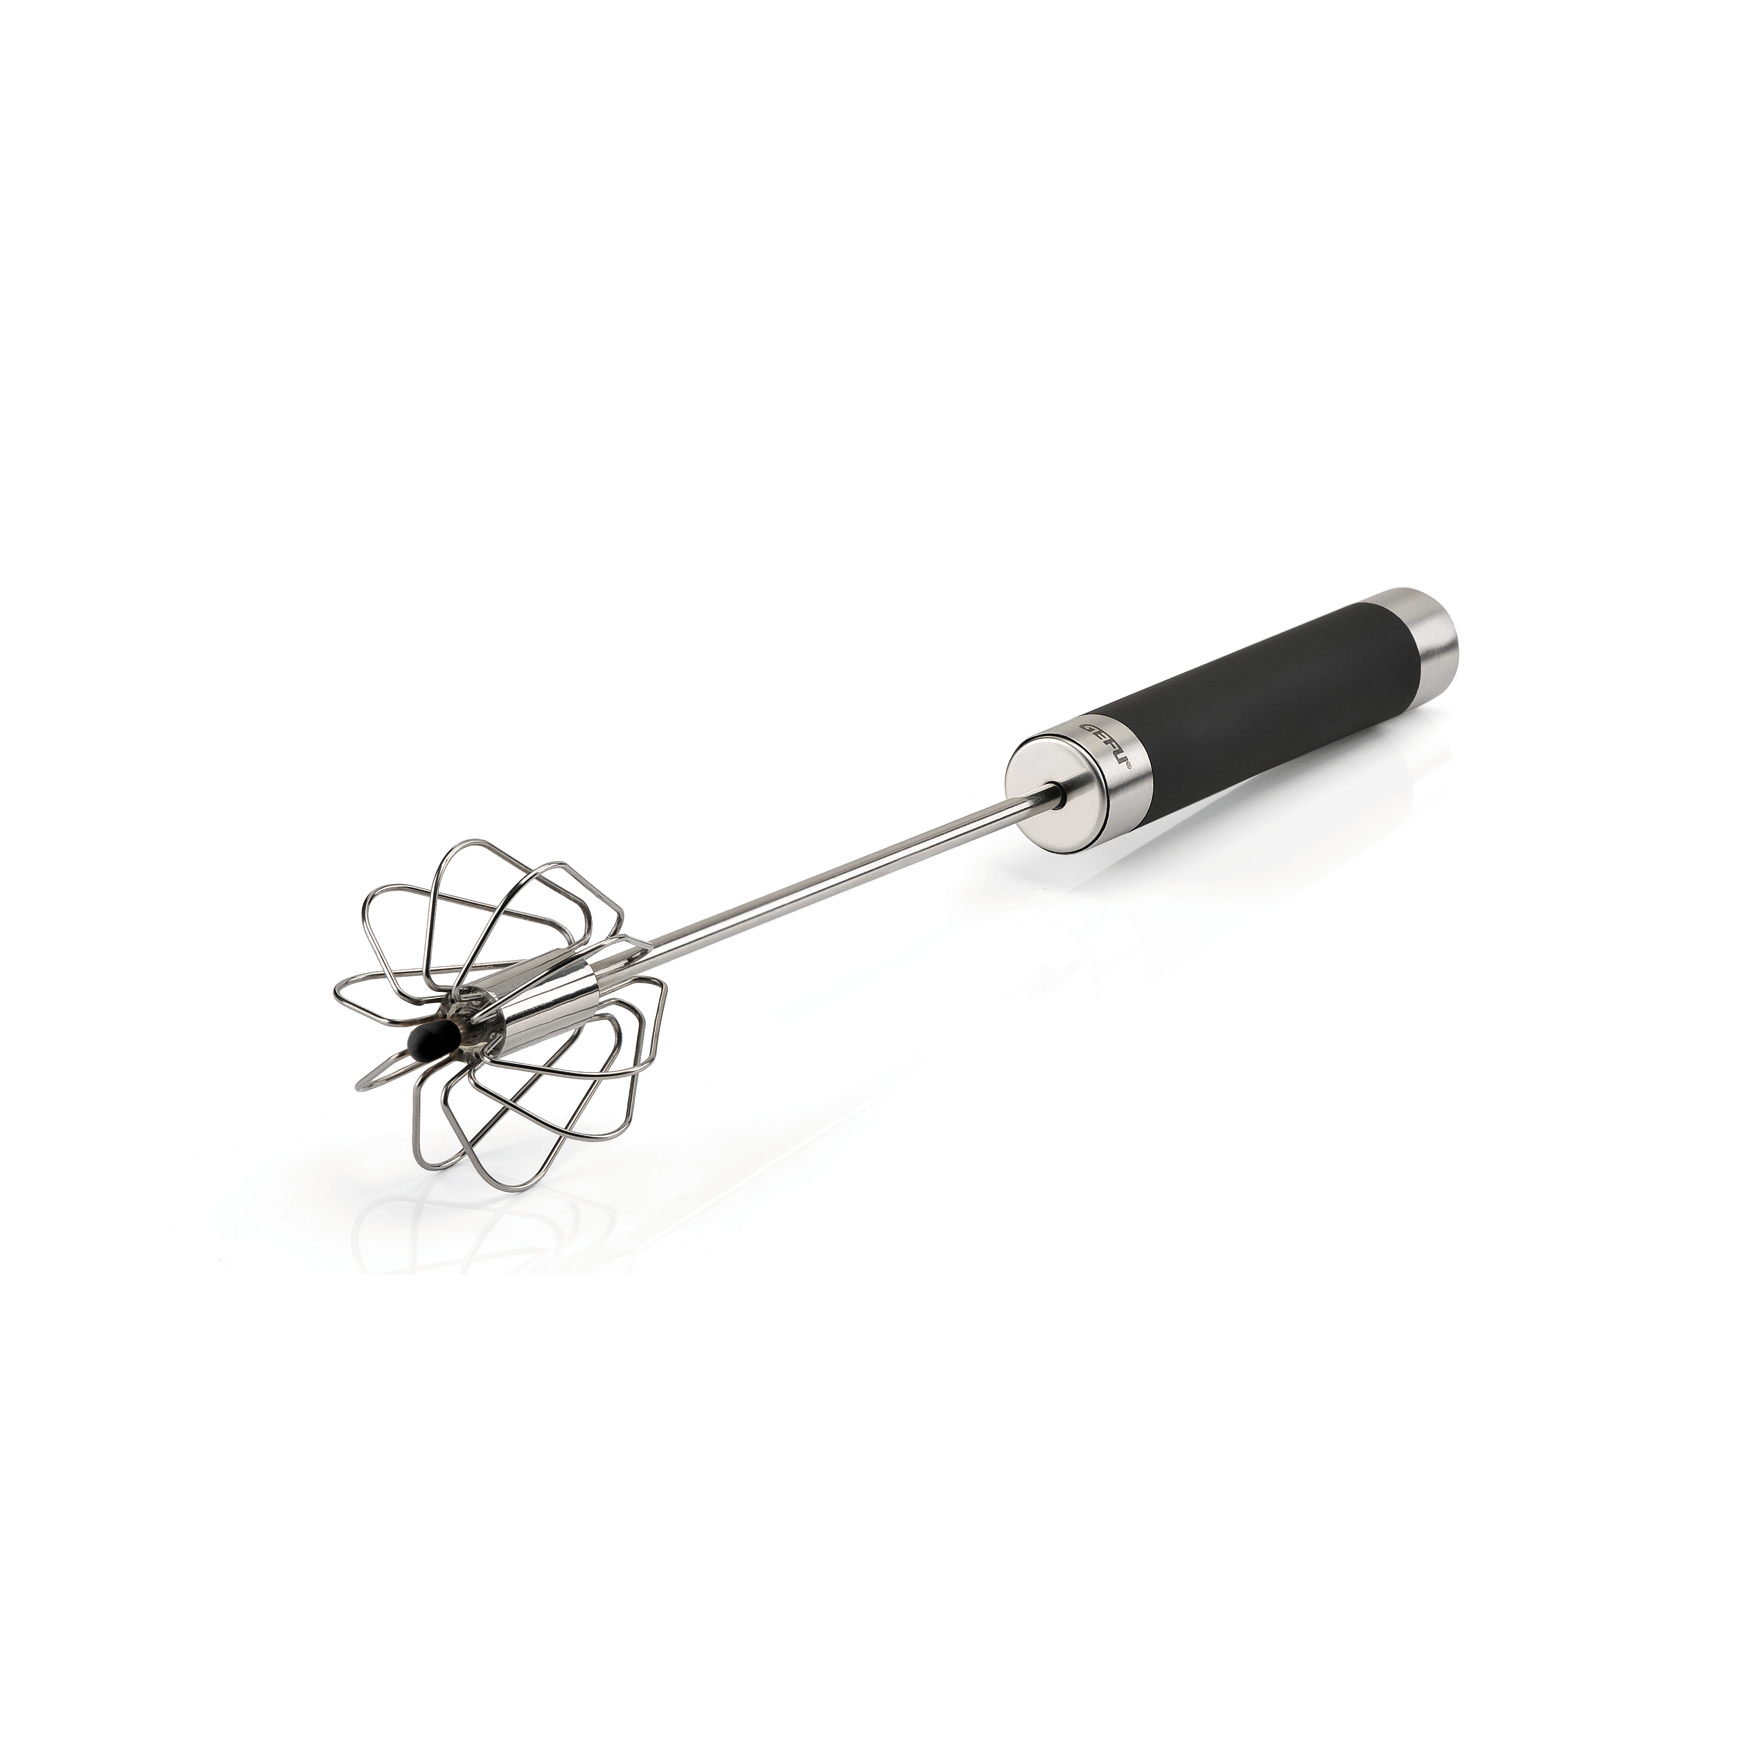 Universal rotary whisk FINELLO